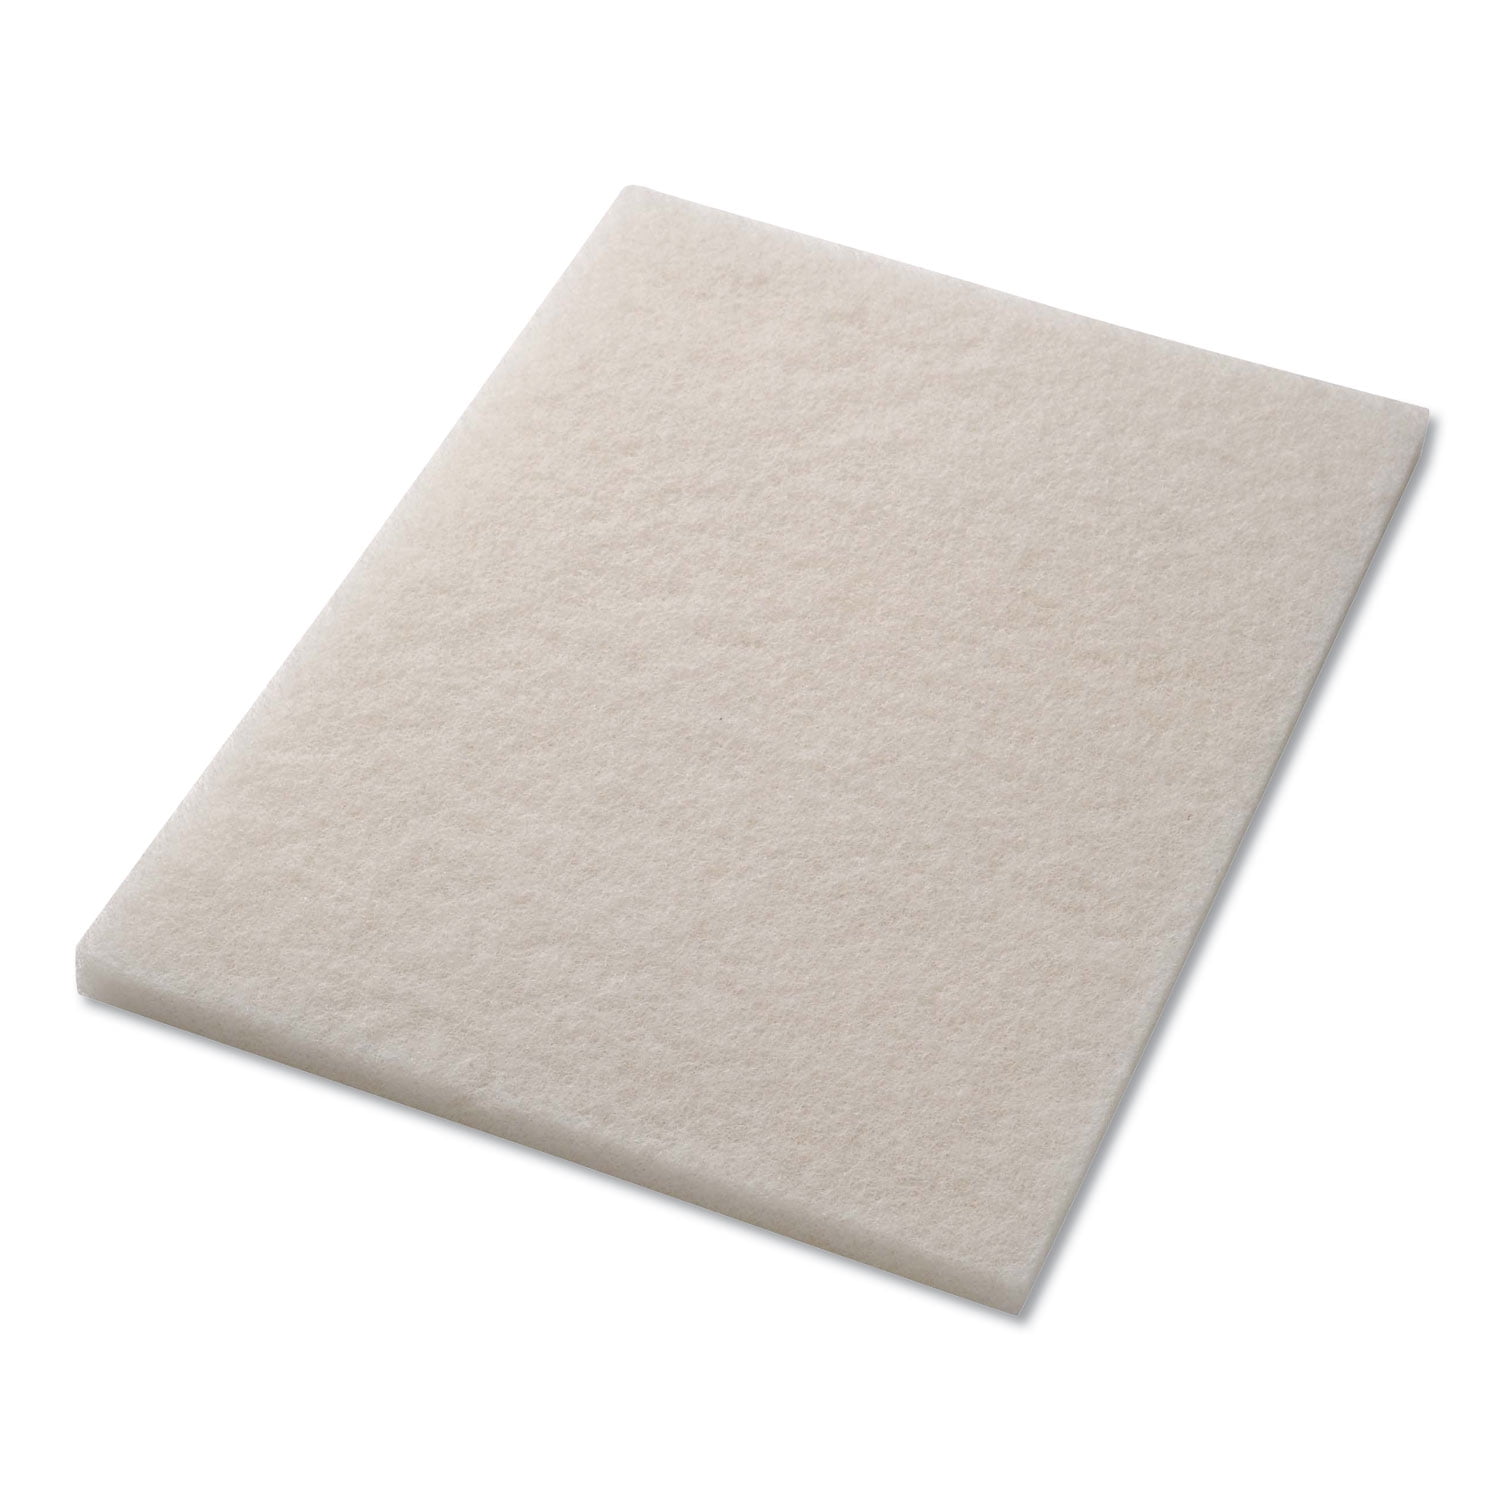 White Terry Cloth New 2pk New 4JD55 Bakers Pad R 